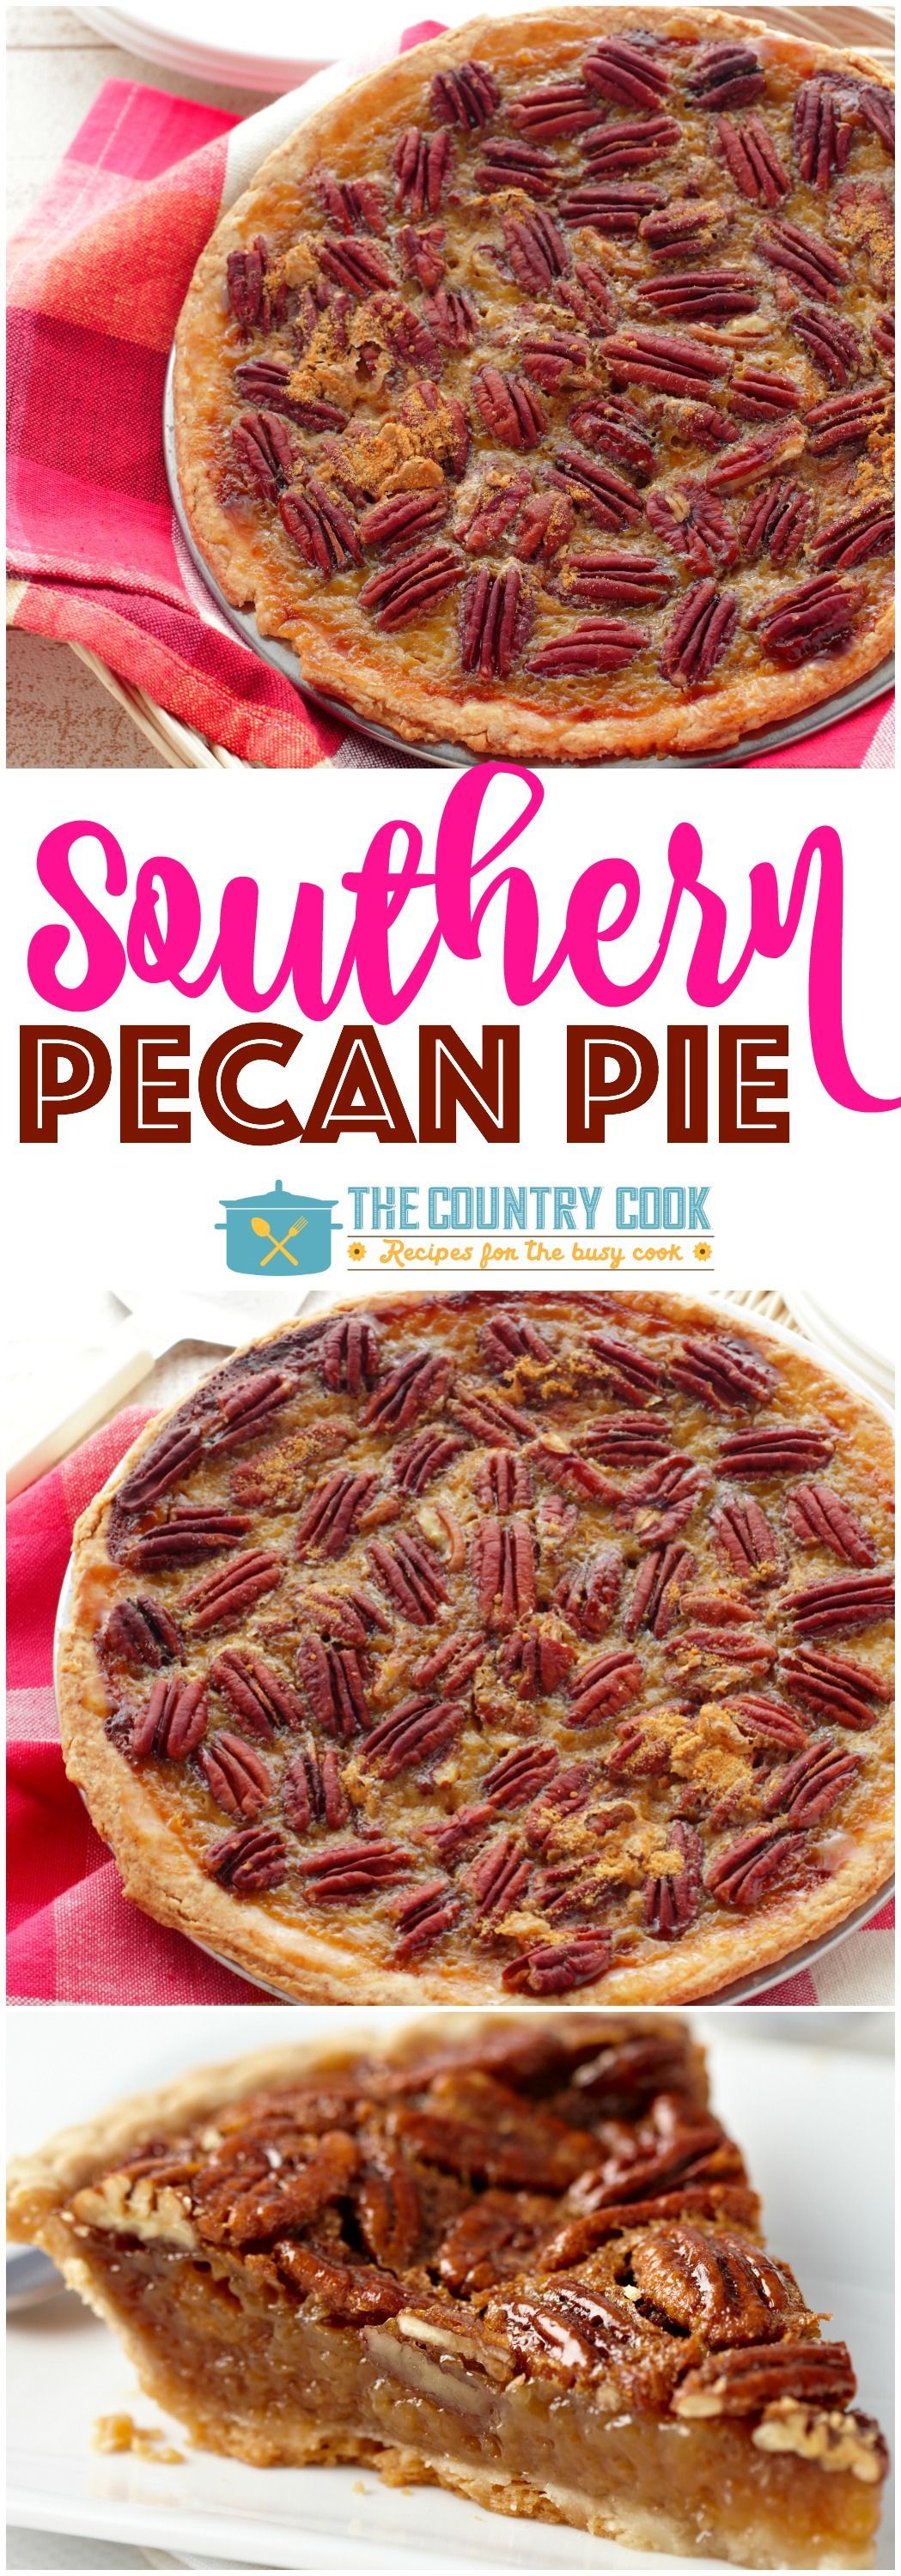 There is nothing like Homemade Southern Pecan Pie. This recipe has won baking contests! It goes perfectly with my simple Wham Bam Pie Crust! -   21 baking recipes pie
 ideas